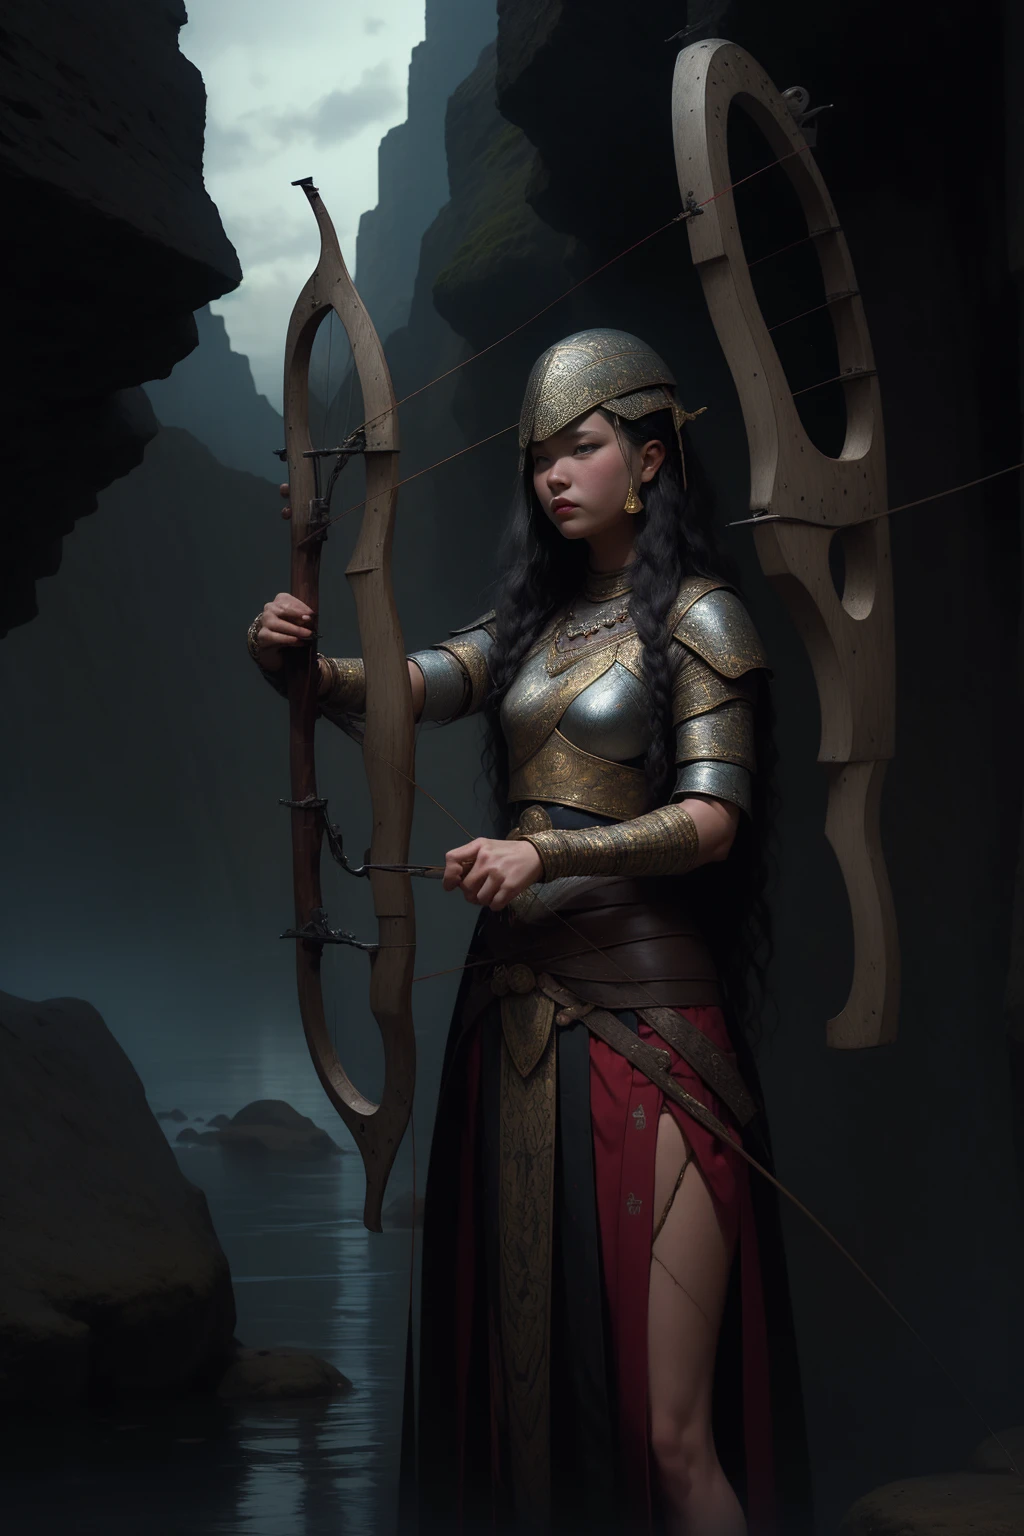 ((1 girl, extremely detailed archer, detailed archery pose: 1.5)), complex bow, dramatic movement, striking silhouette, flowing hair, intense focus, muscular physique, realistic skin texture, high quality, 8k, cinematic lighting , dramatic shadows, warm color tones, vibrant colors, fantasy landscape background, lush vegetation, rocky cliff, dramatic sky, dynamic action, stunning composition, masterpiece, photorealistic, hyper detailed